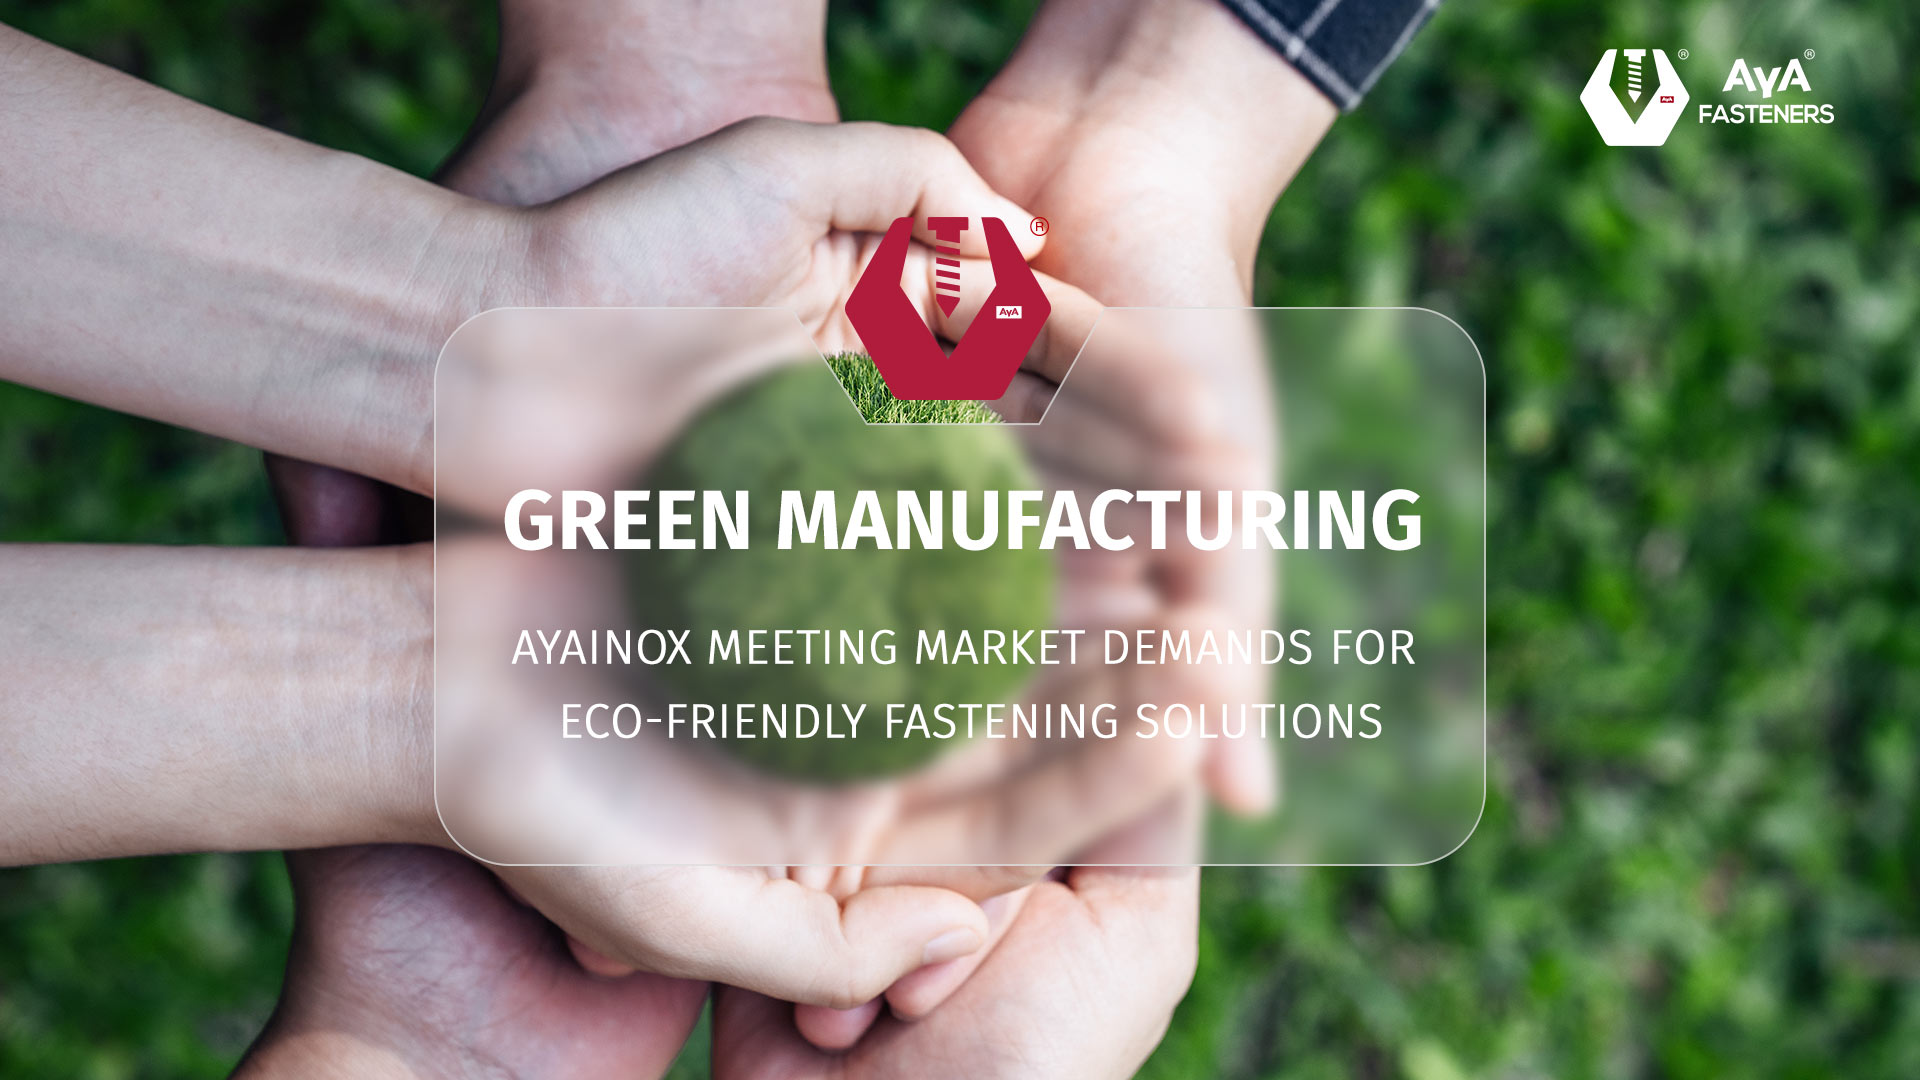 Green Manufacturing: AYAINOX Meeting Market Demands for Eco-Friendly Fastening Solutions